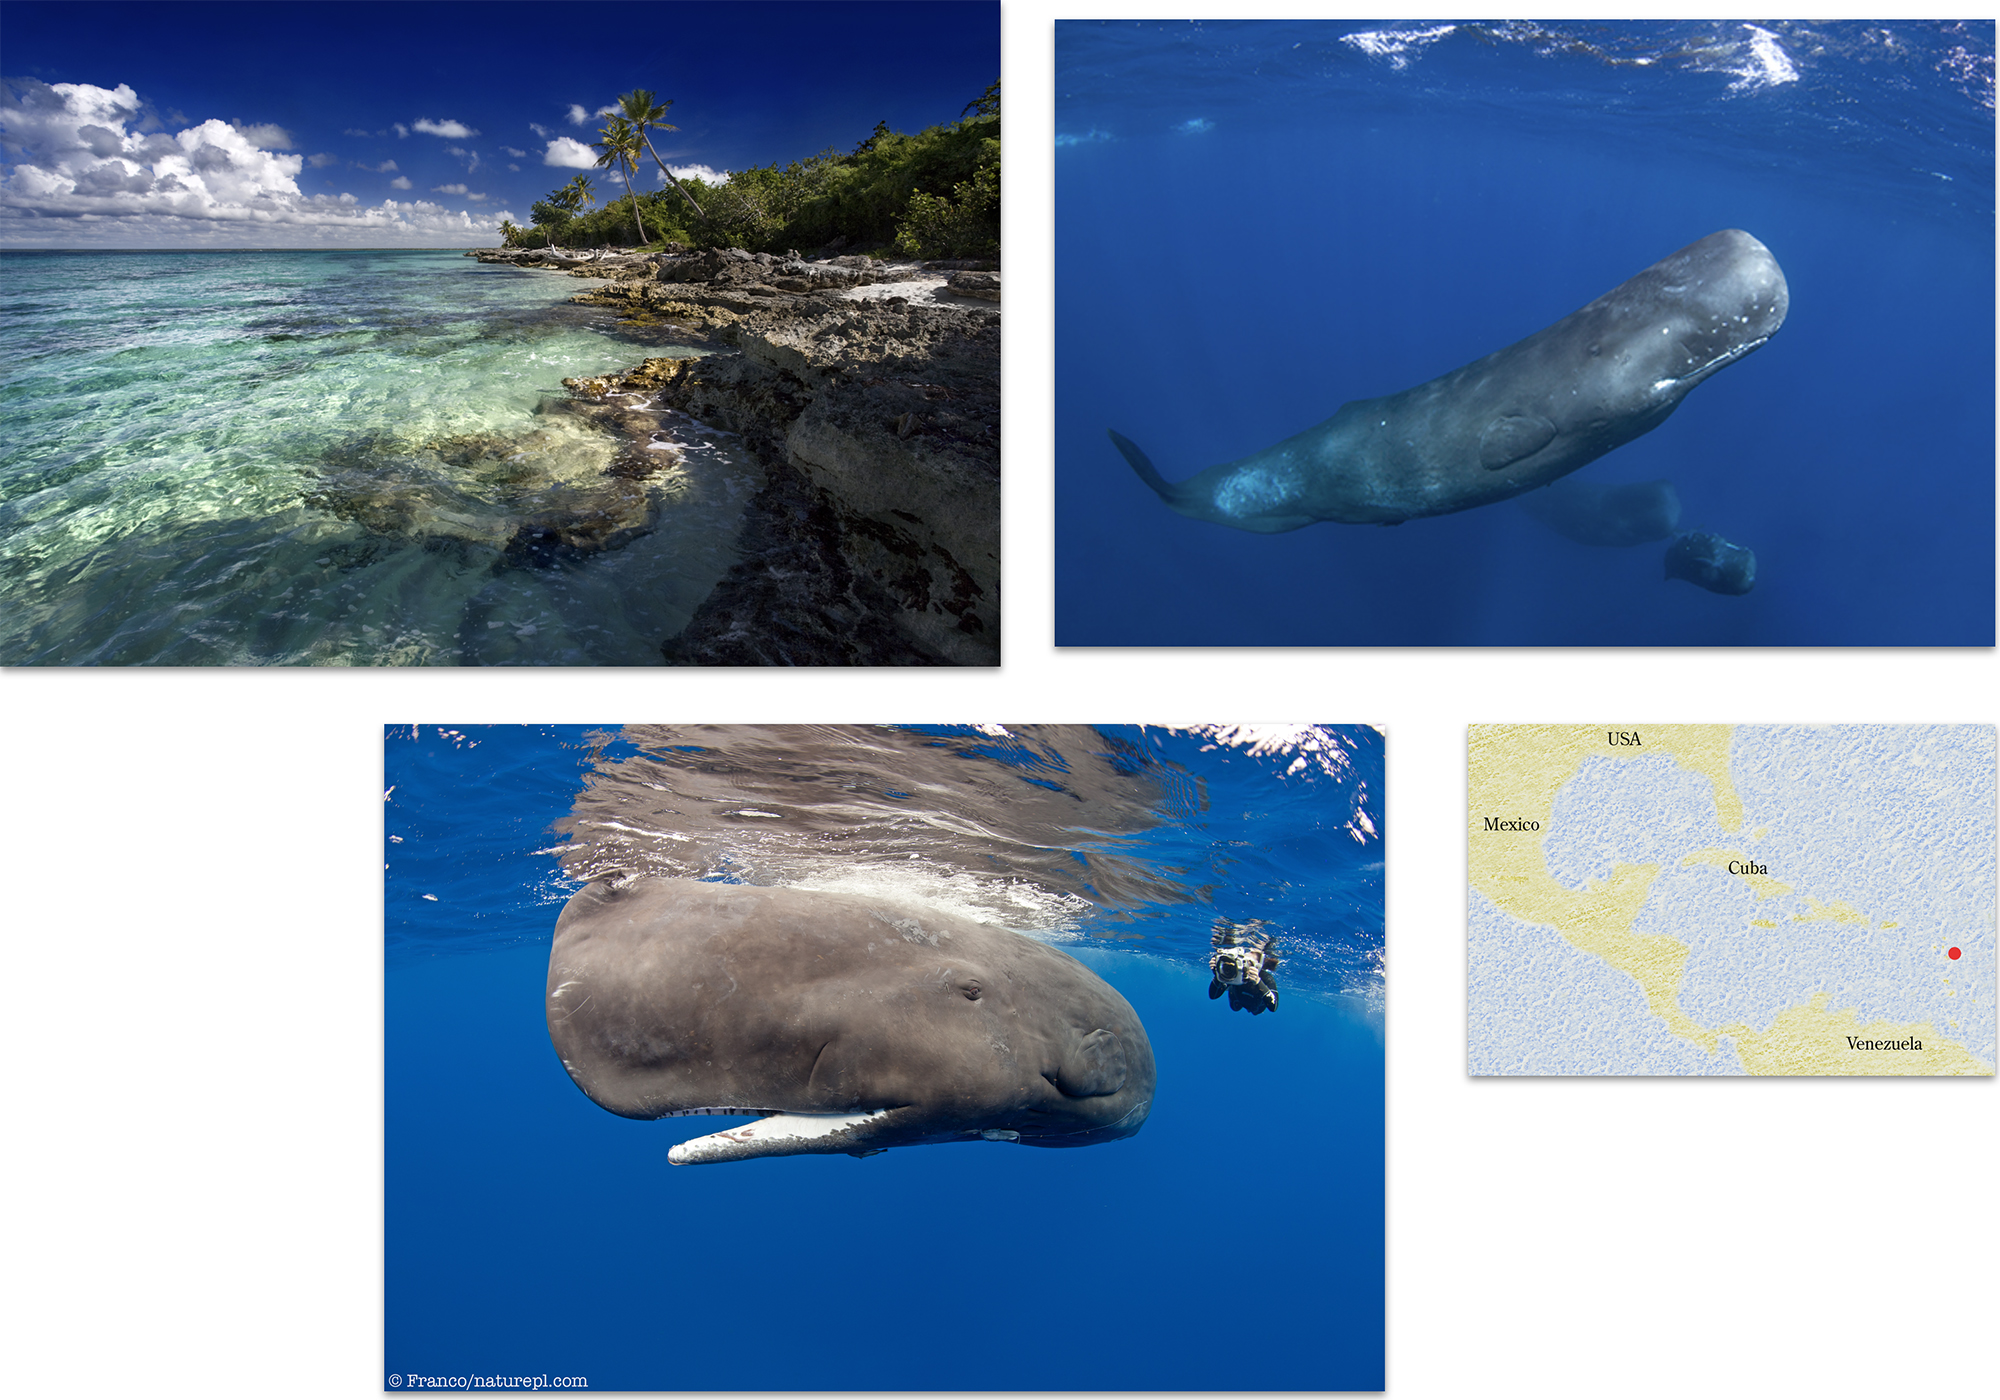 Snorkelling with Sperm Whales in the Caribbean 